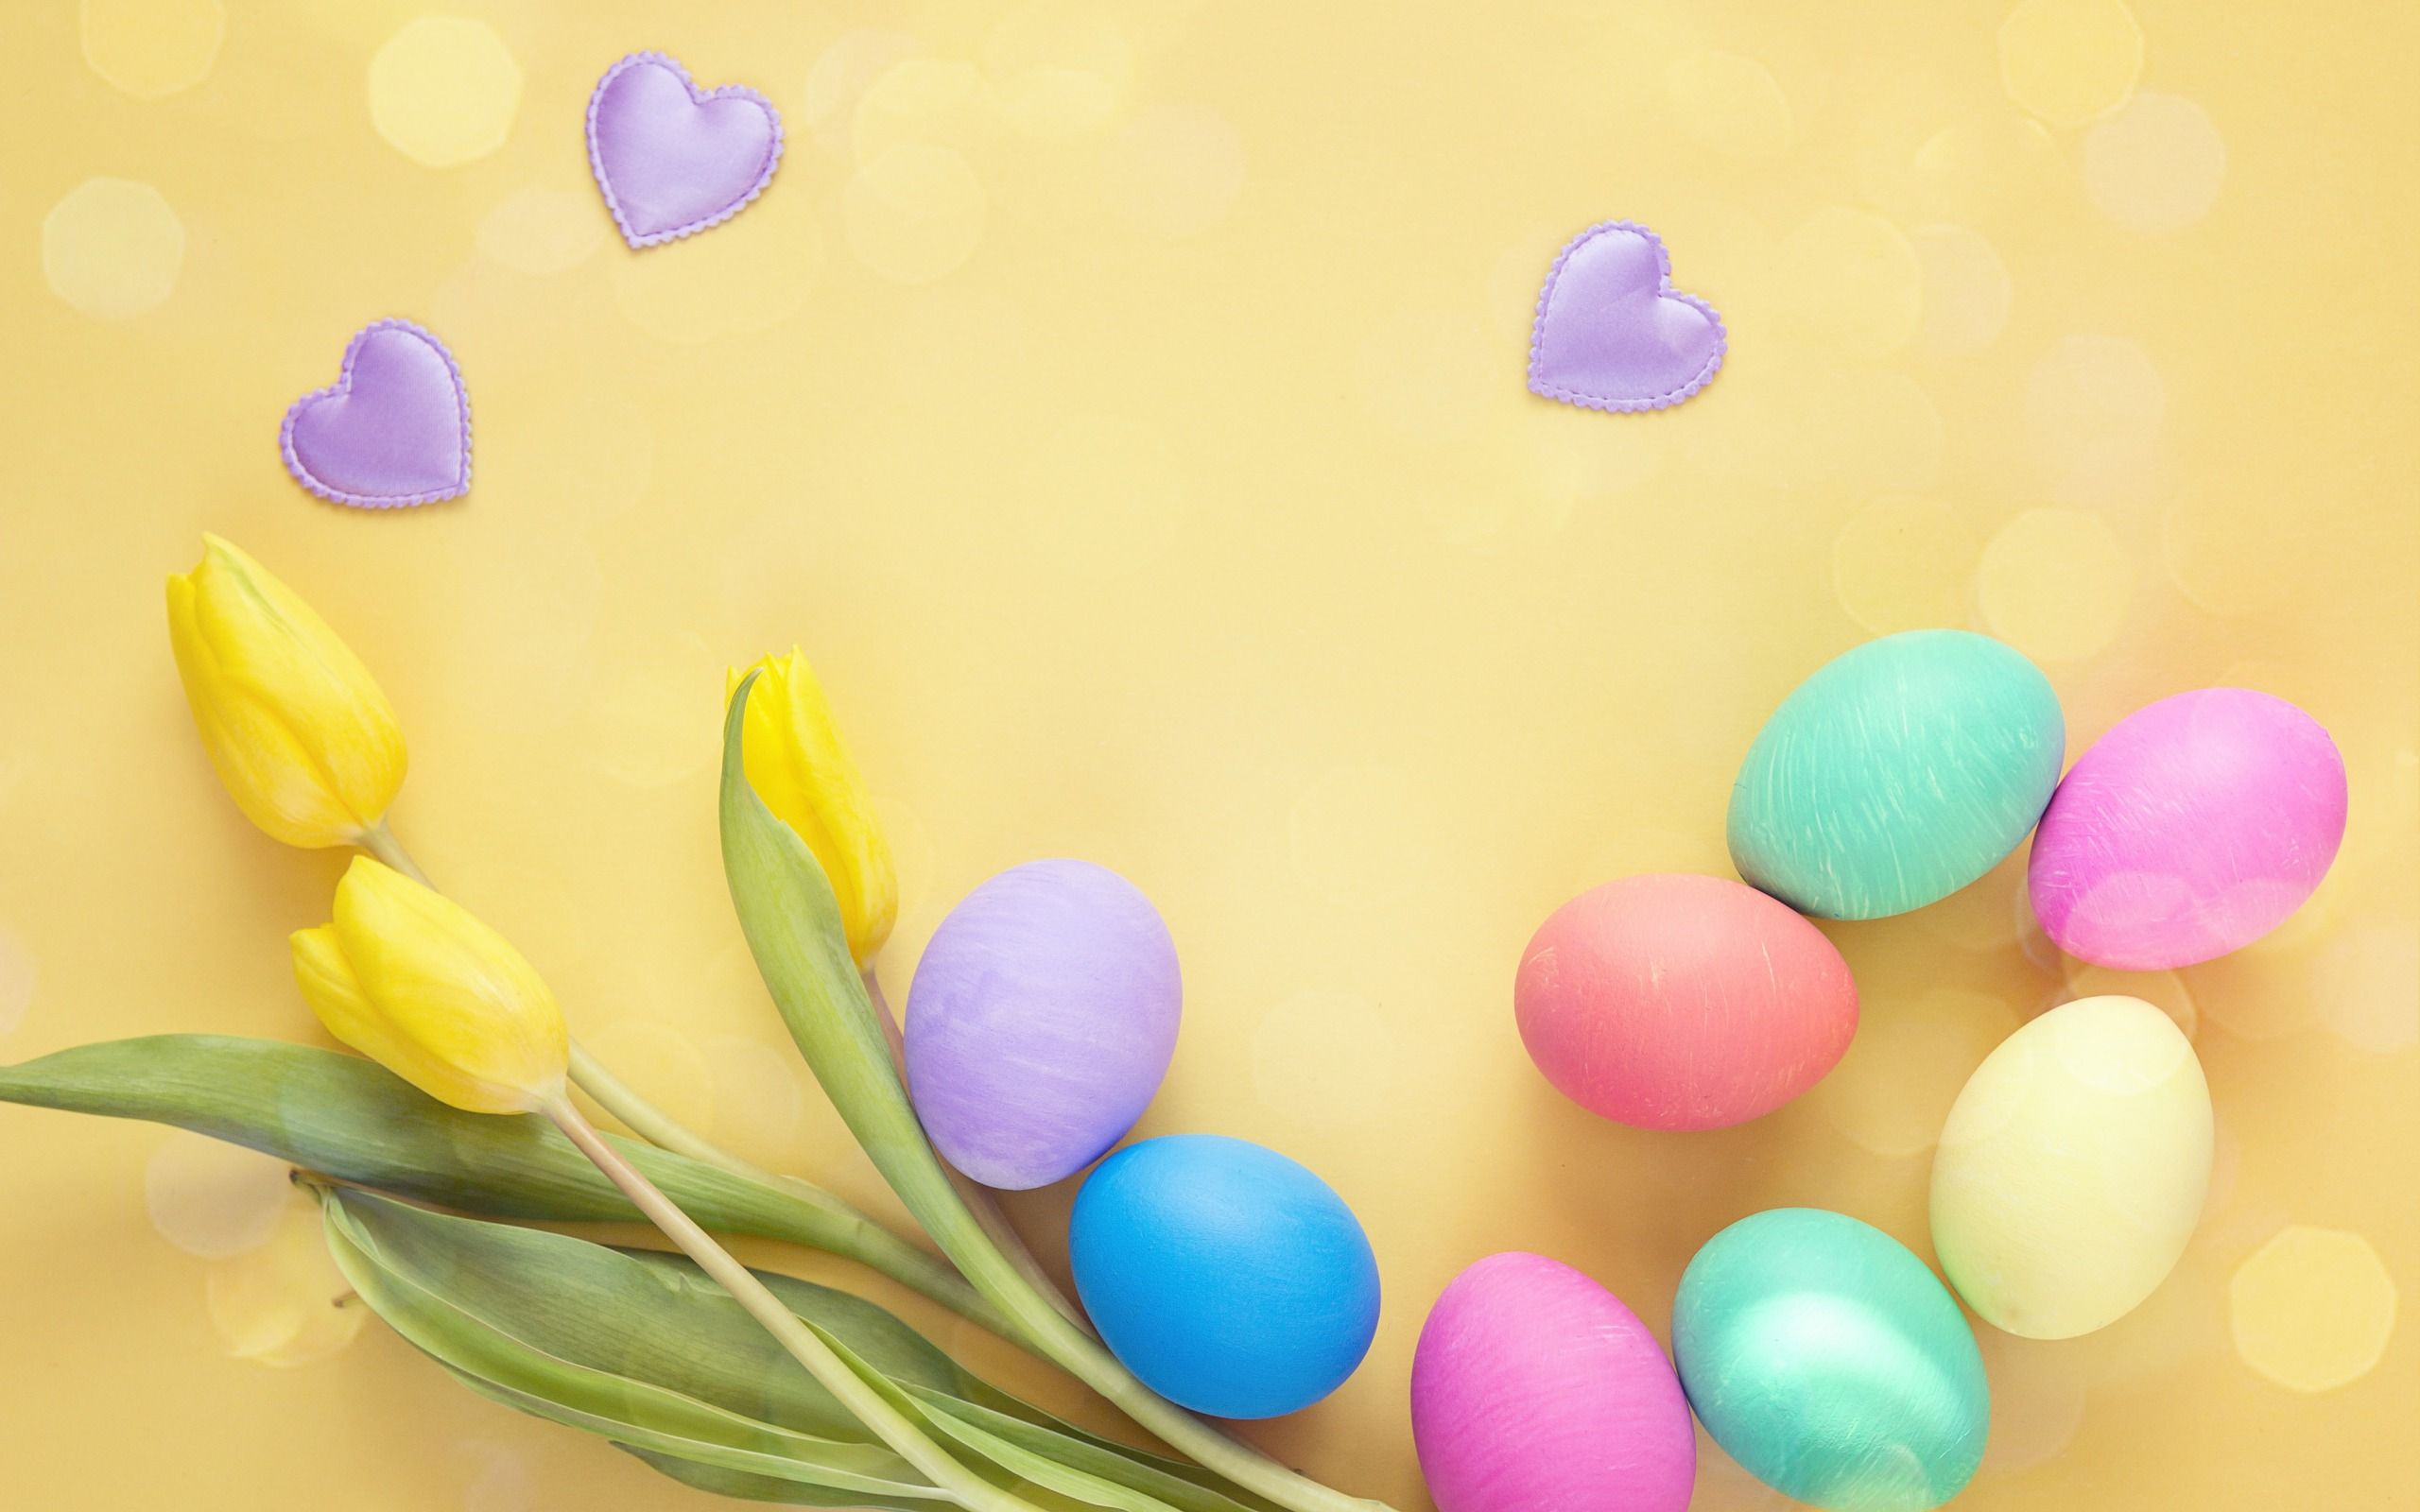 Download wallpaper Easter eggs, yellow background, painted eggs, April April Easter, yellow tulips, postcard background, spring flowers for desktop with resolution 2560x1600. High Quality HD picture wallpaper